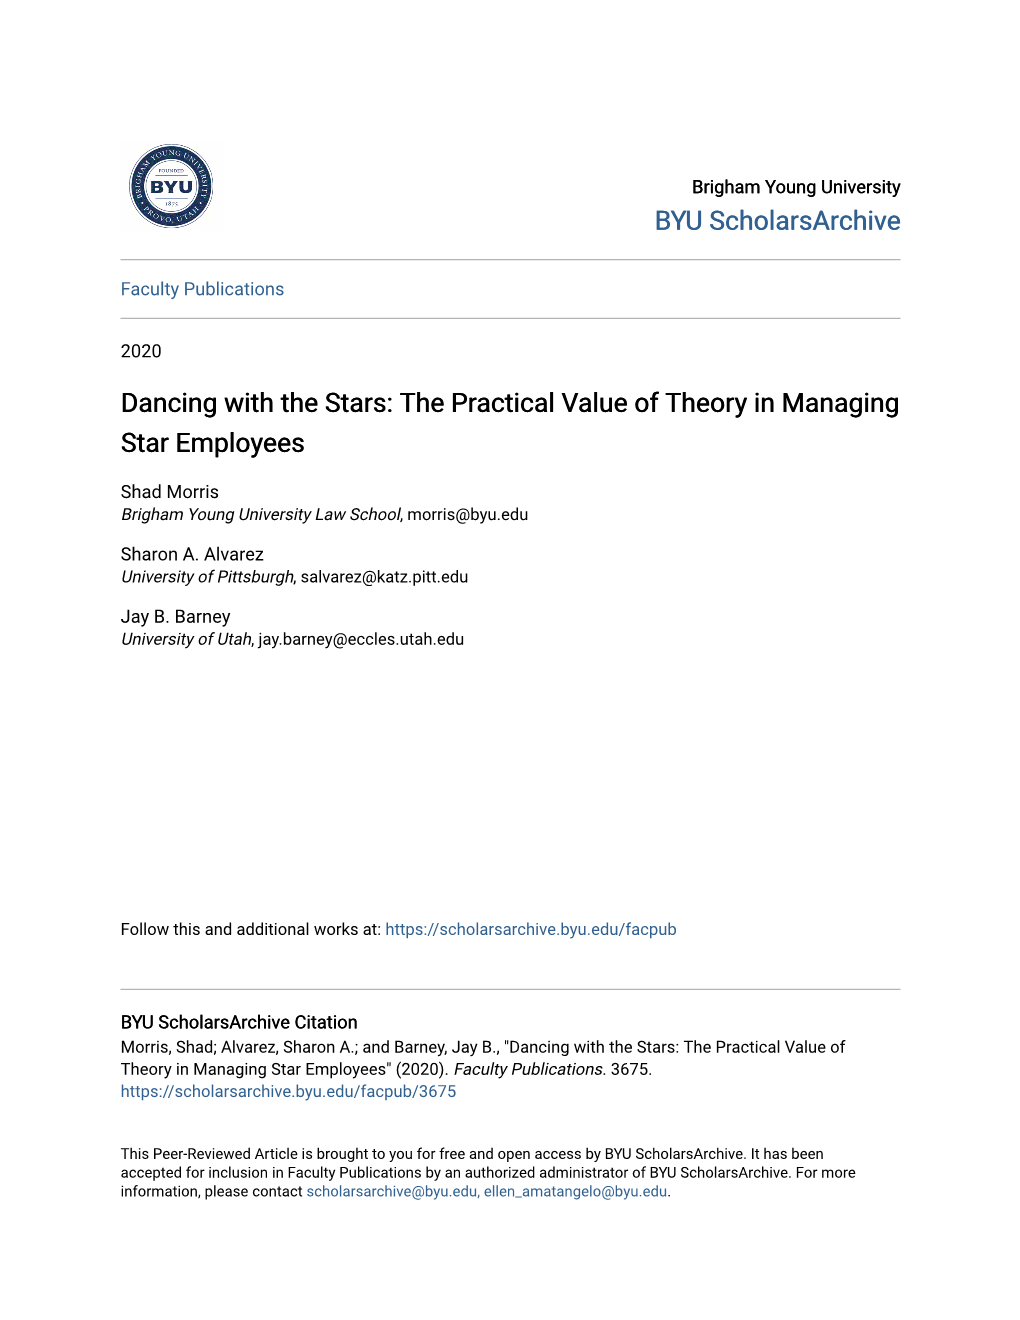 Dancing with the Stars: the Practical Value of Theory in Managing Star Employees